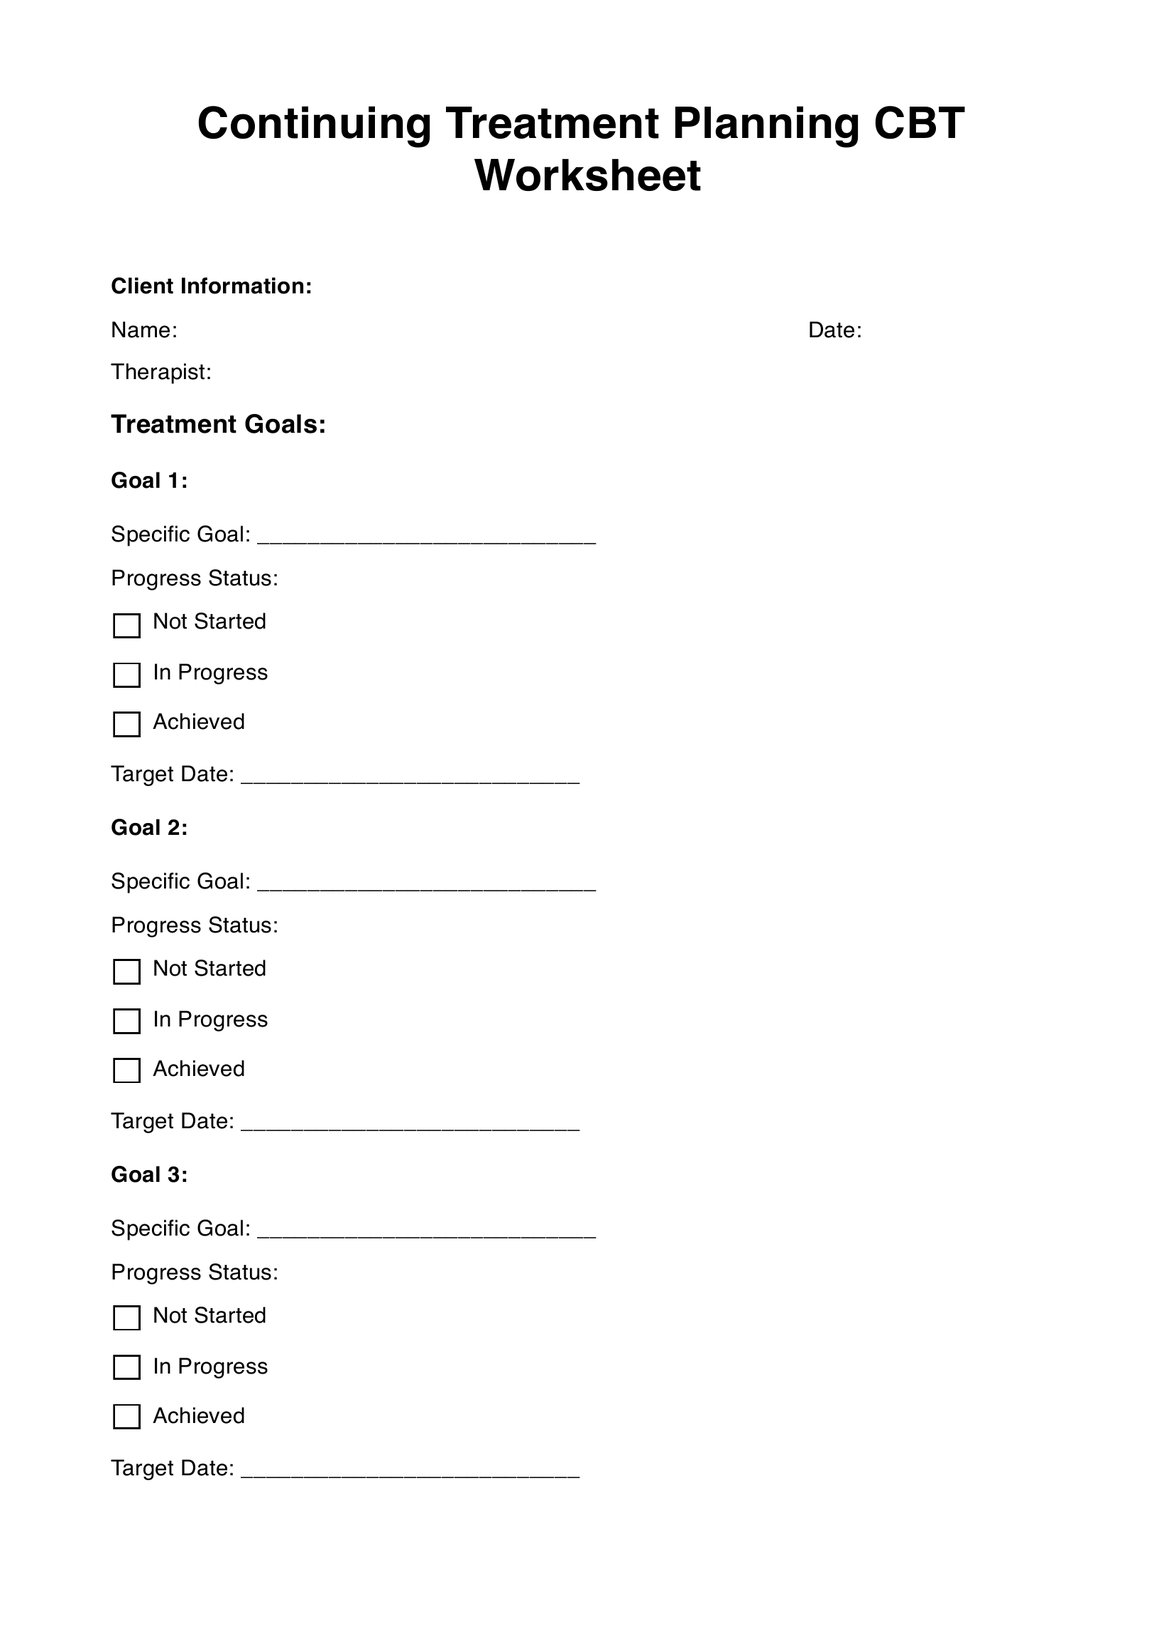 Continuing Treatment Planning CBT Worksheet PDF Example